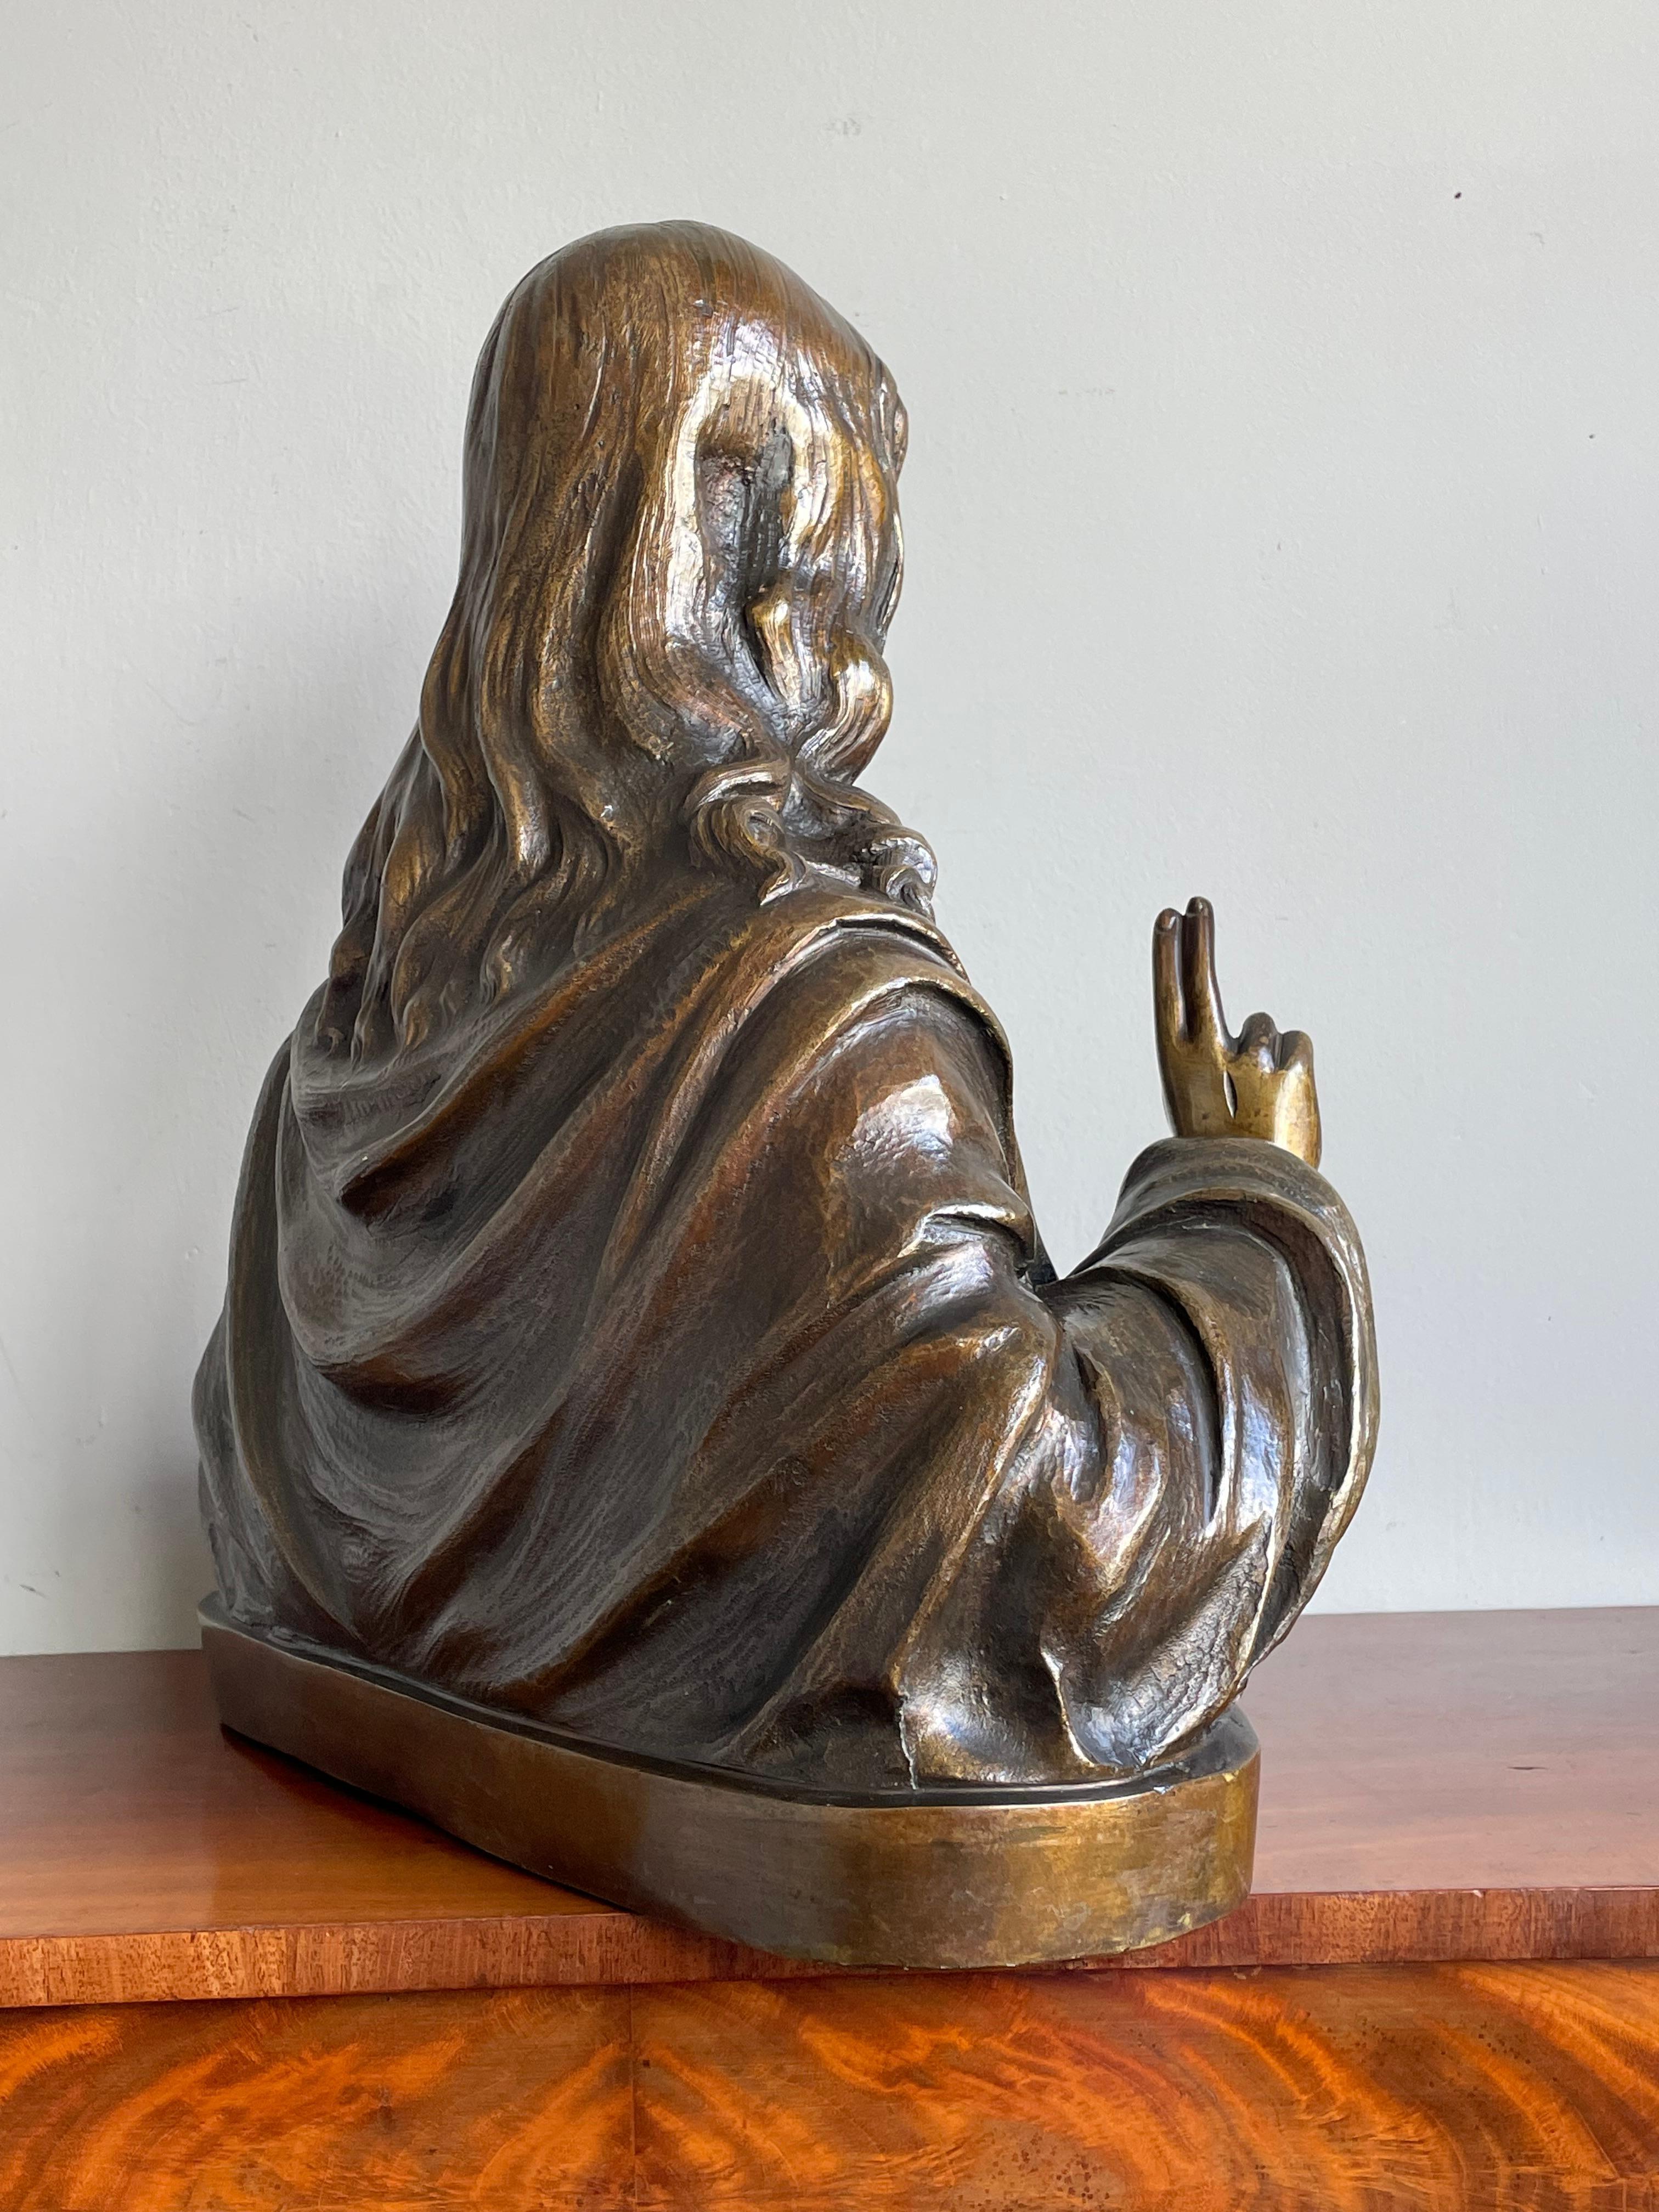 Rare Antique Bronze Holy Heart Sculpture / Bust of Our Lord Jesus Christ 1920 For Sale 8